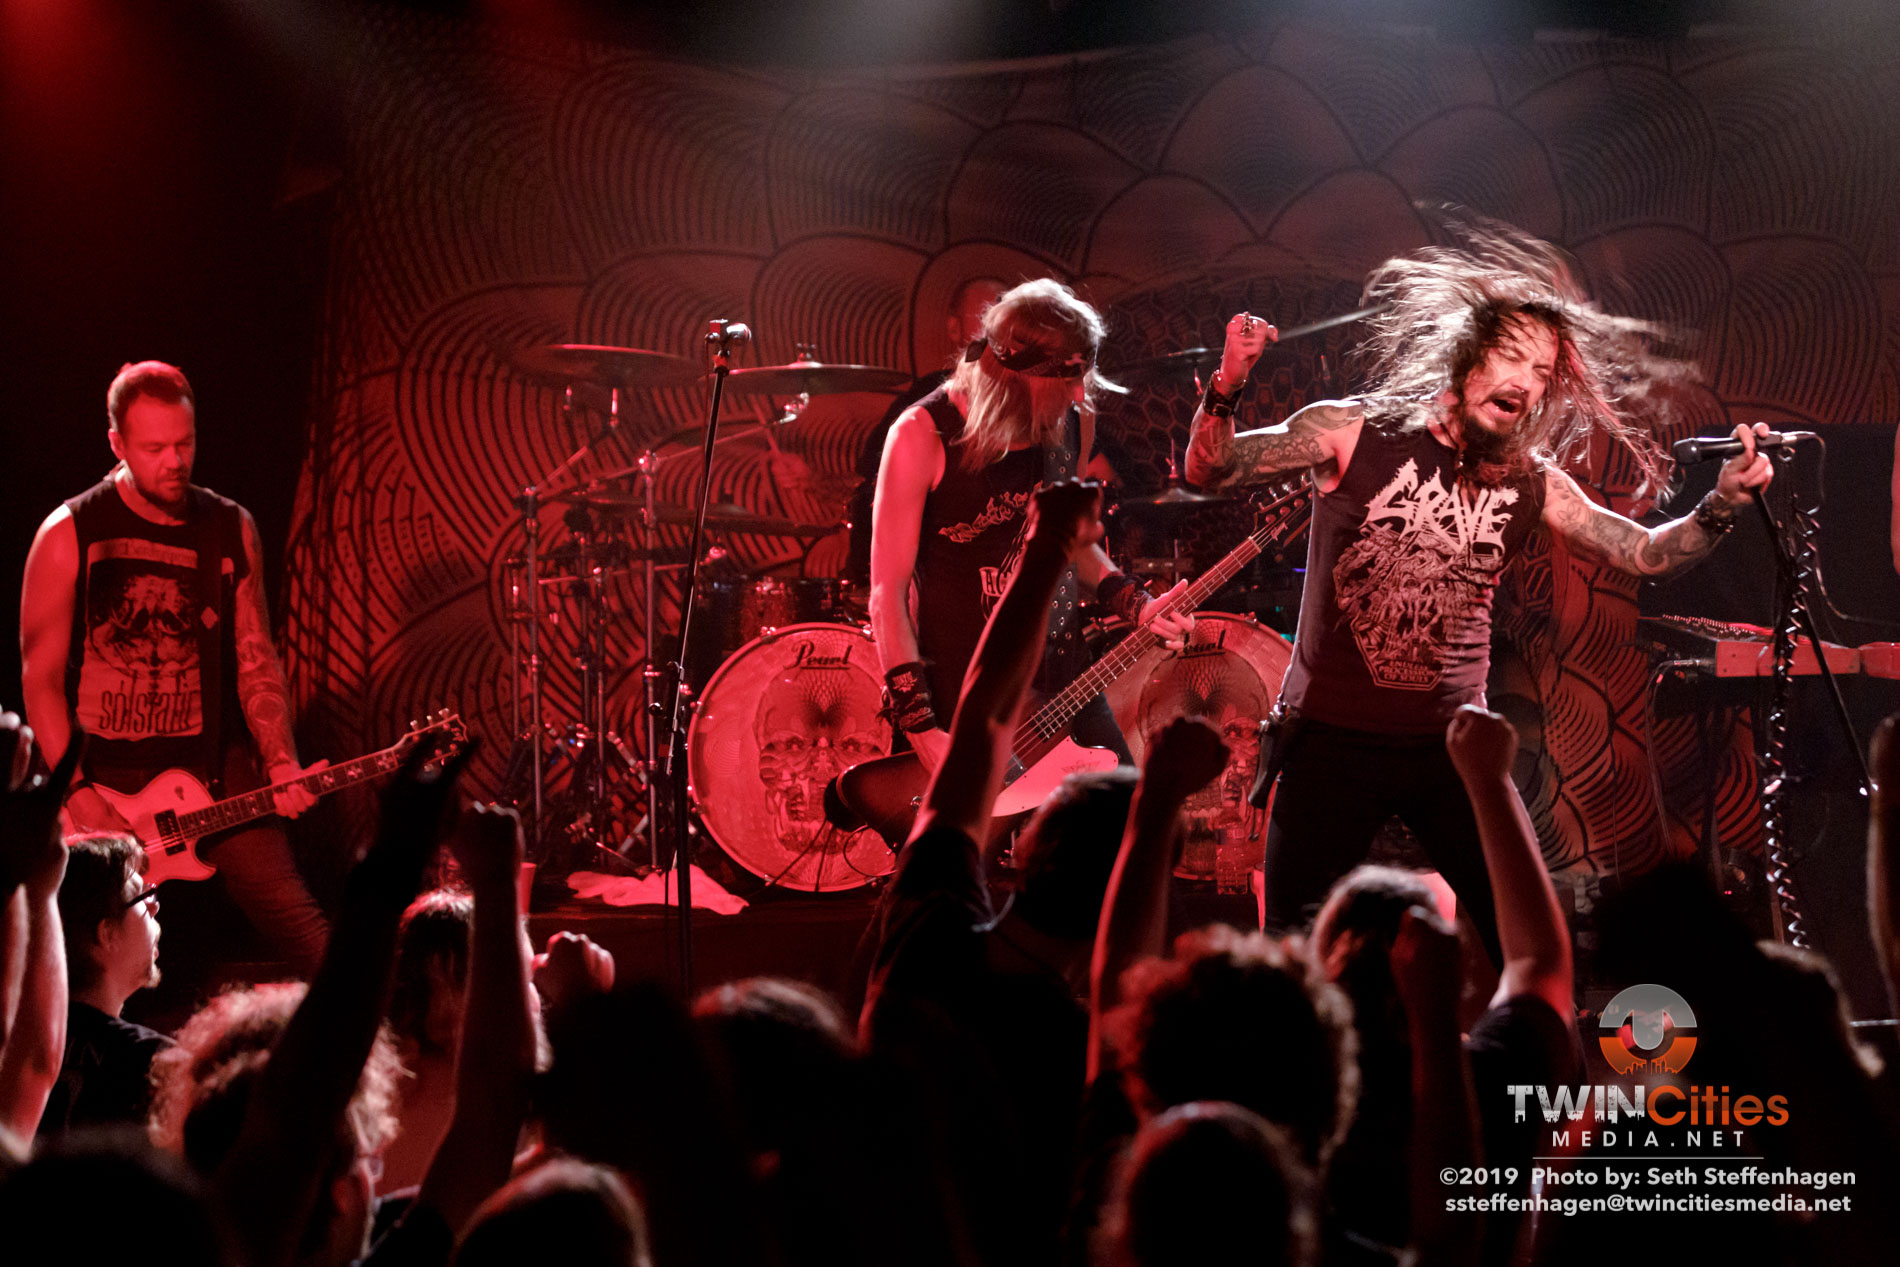 September 30, 2019 - Minneapolis, Minnesota, United States -  Amorphis live in concert at The Cabooze opening for Delain along with Anneke Van Giersbergen.

(Photo by Seth Steffenhagen/Steffenhagen Photography)